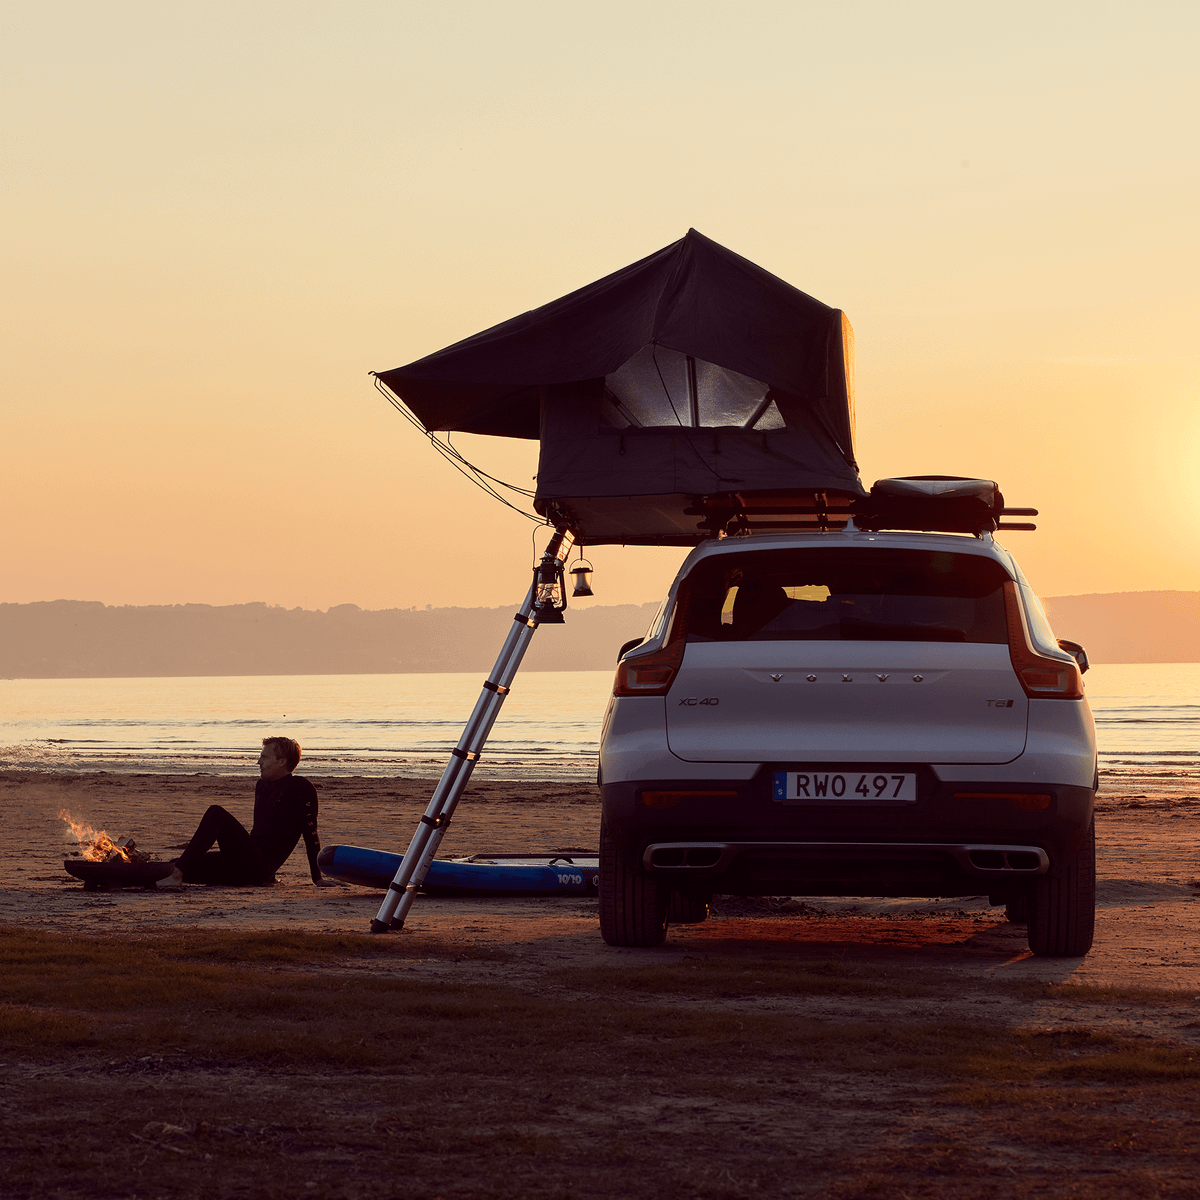 Two people are sitting by a fire on a beach next to a parked car with a roof top tent